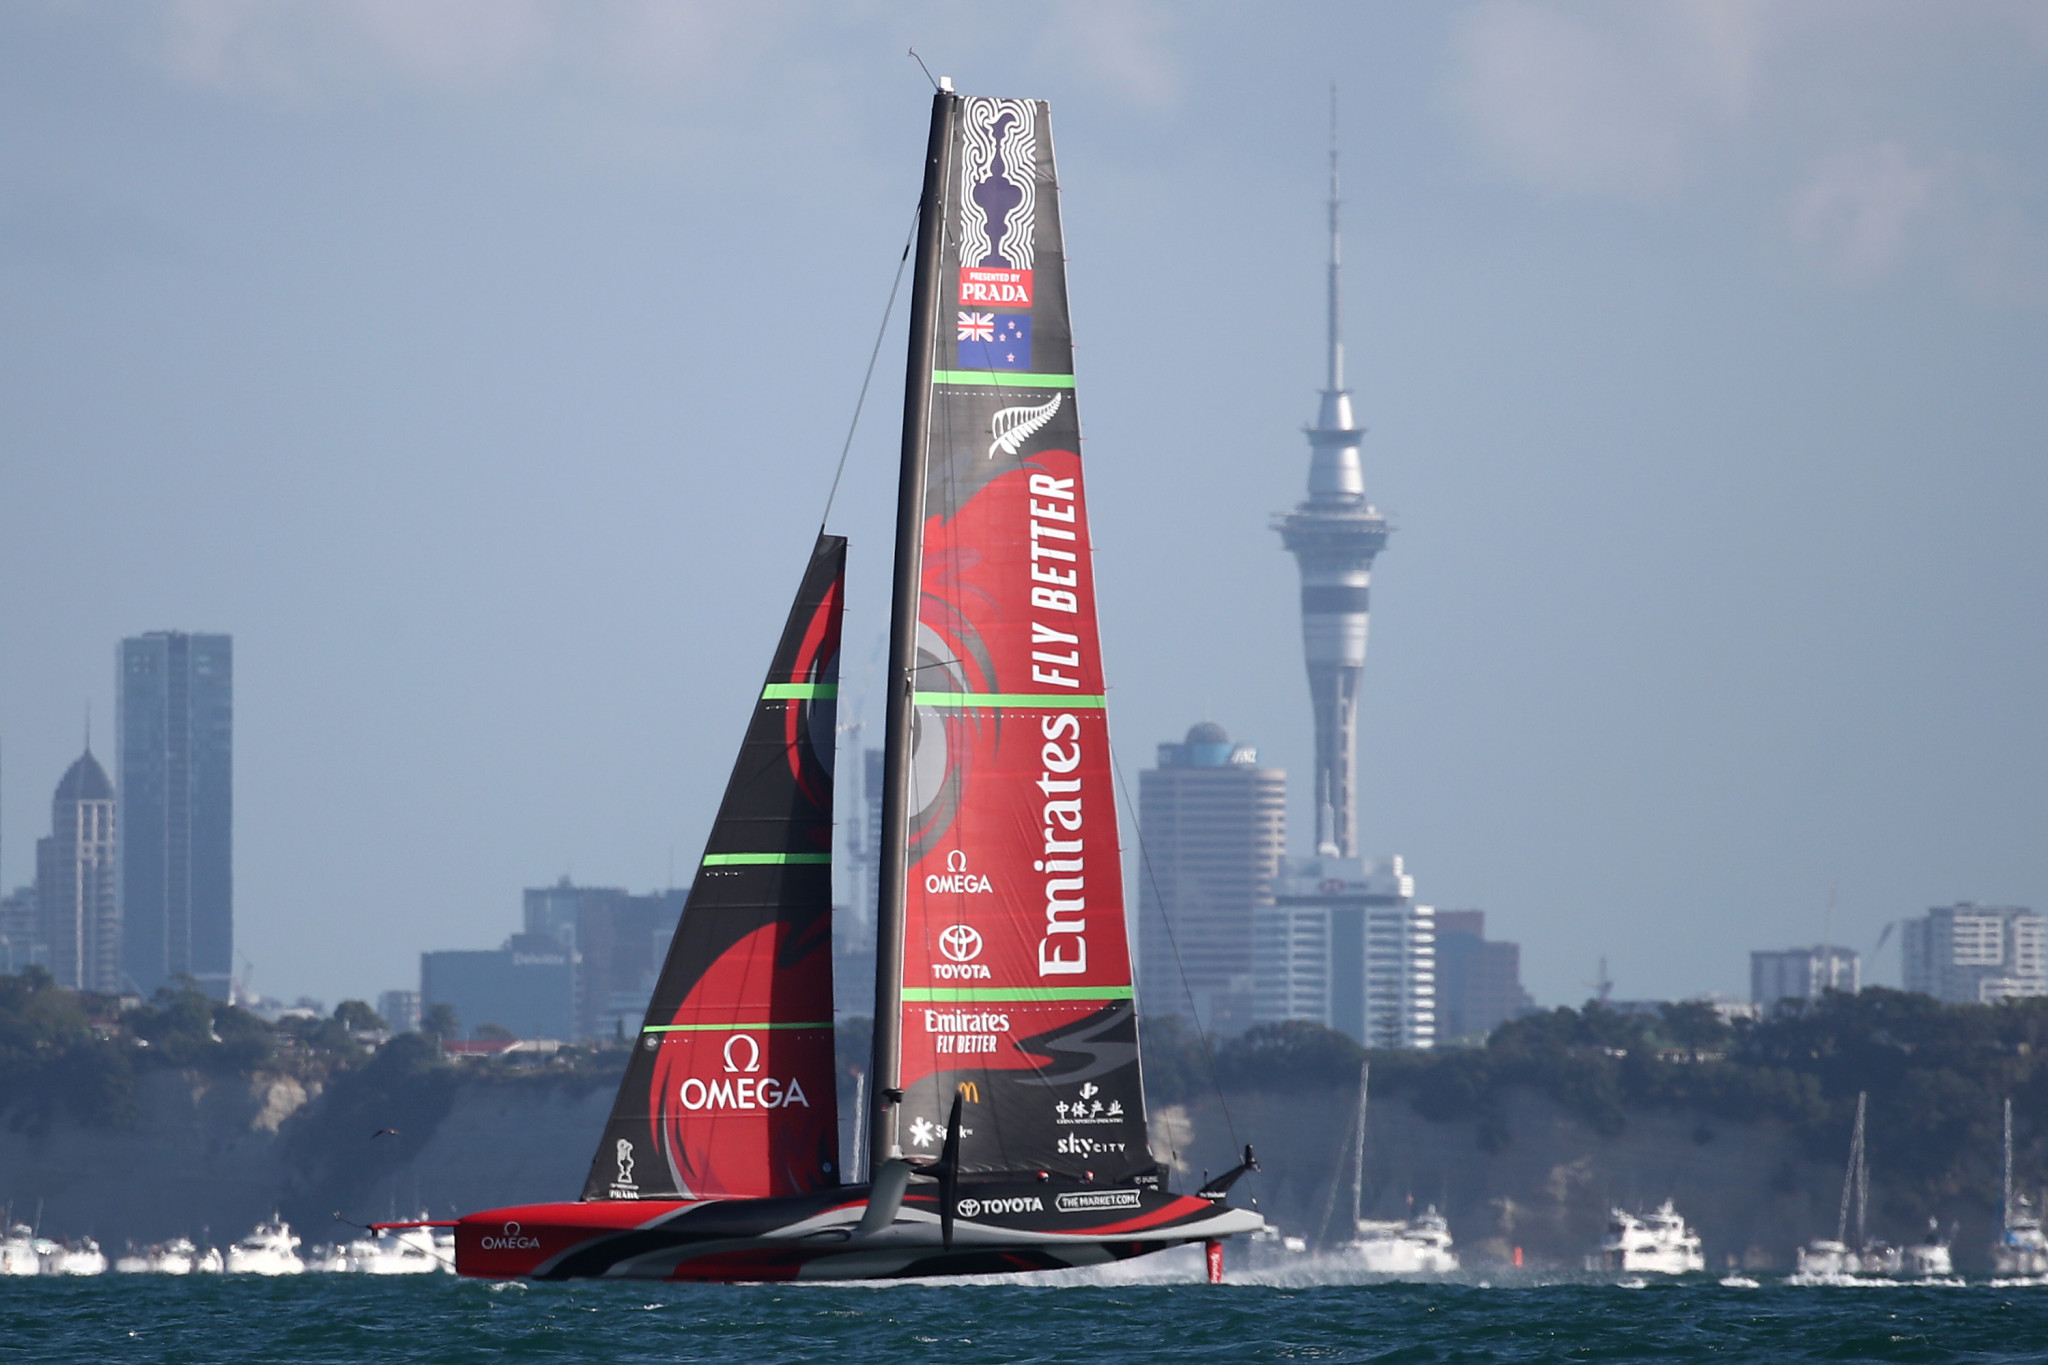 The venue for the 37th America's Cup is expected to be announced in March ©Getty Images